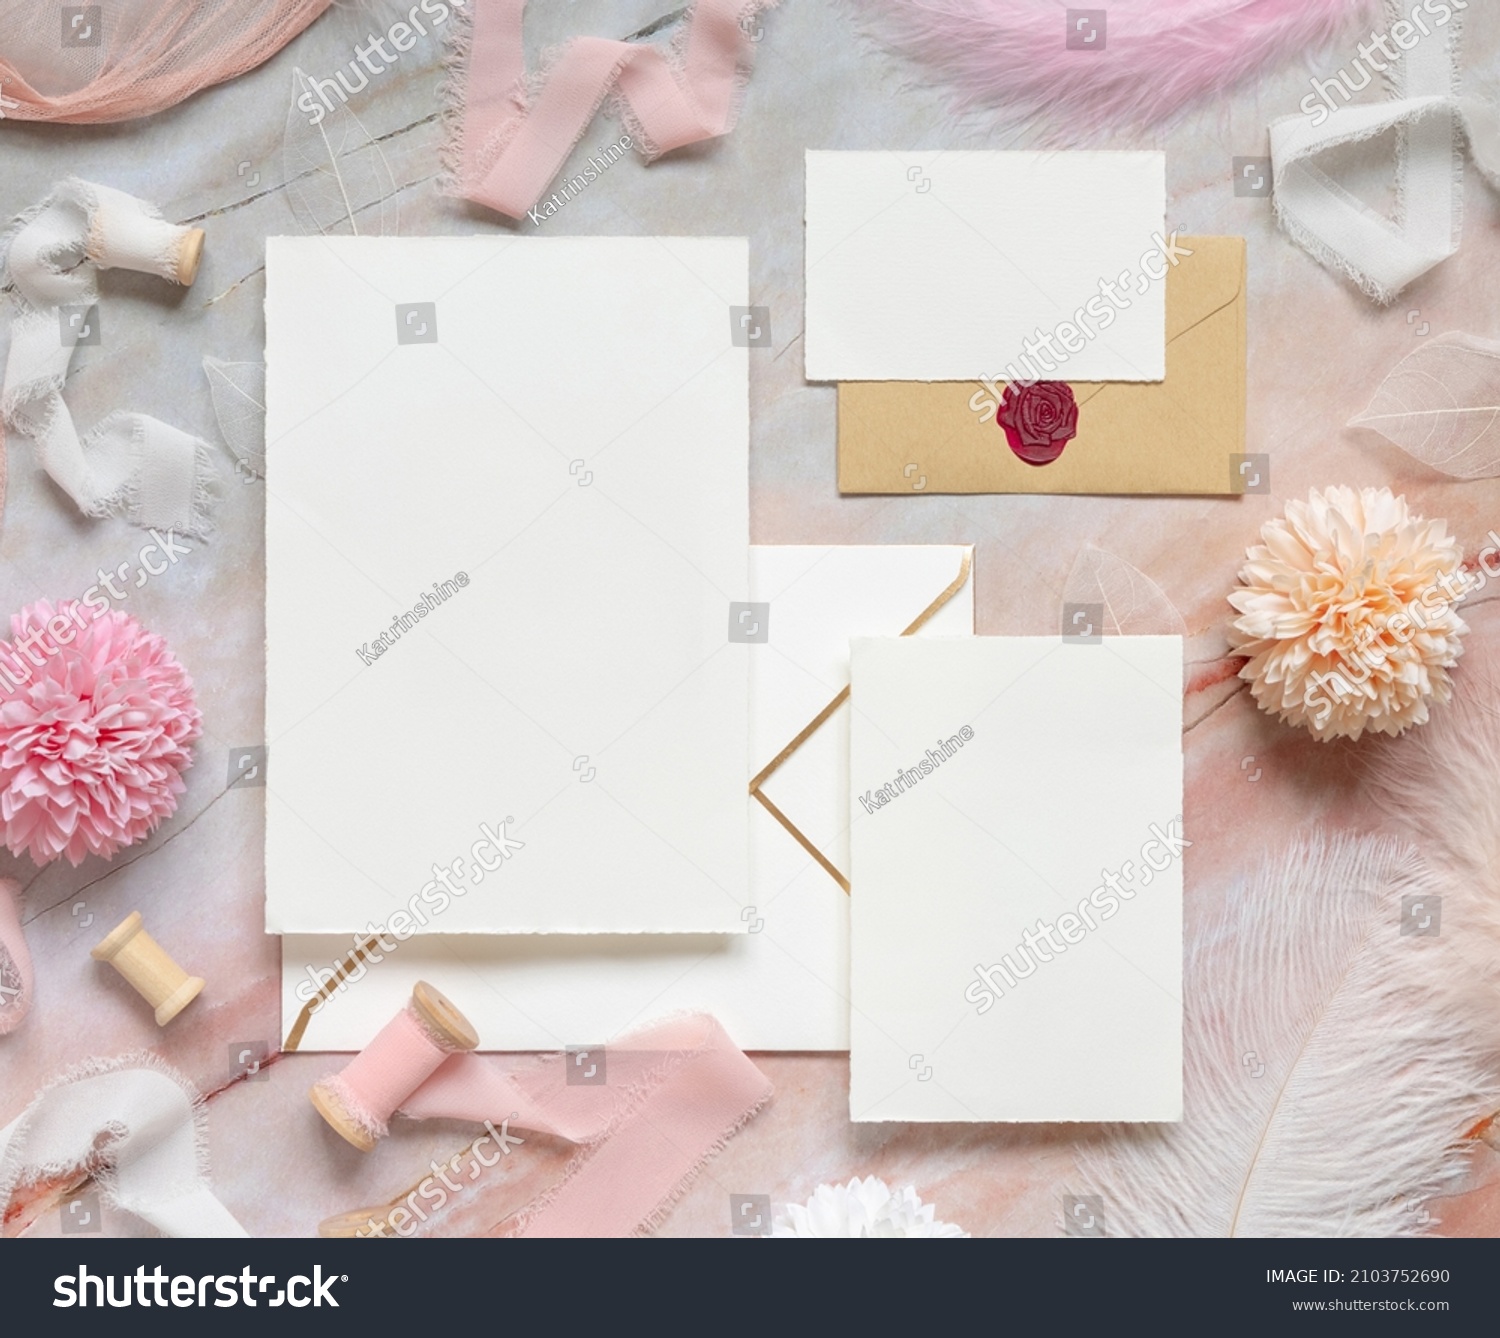 Blank cards and envelopes between pastel flowers, silk ribbons and feathers on marble top view. Romantic scene with wedding suite mockups flat lay,  place for text. Valentines, Spring #2103752690